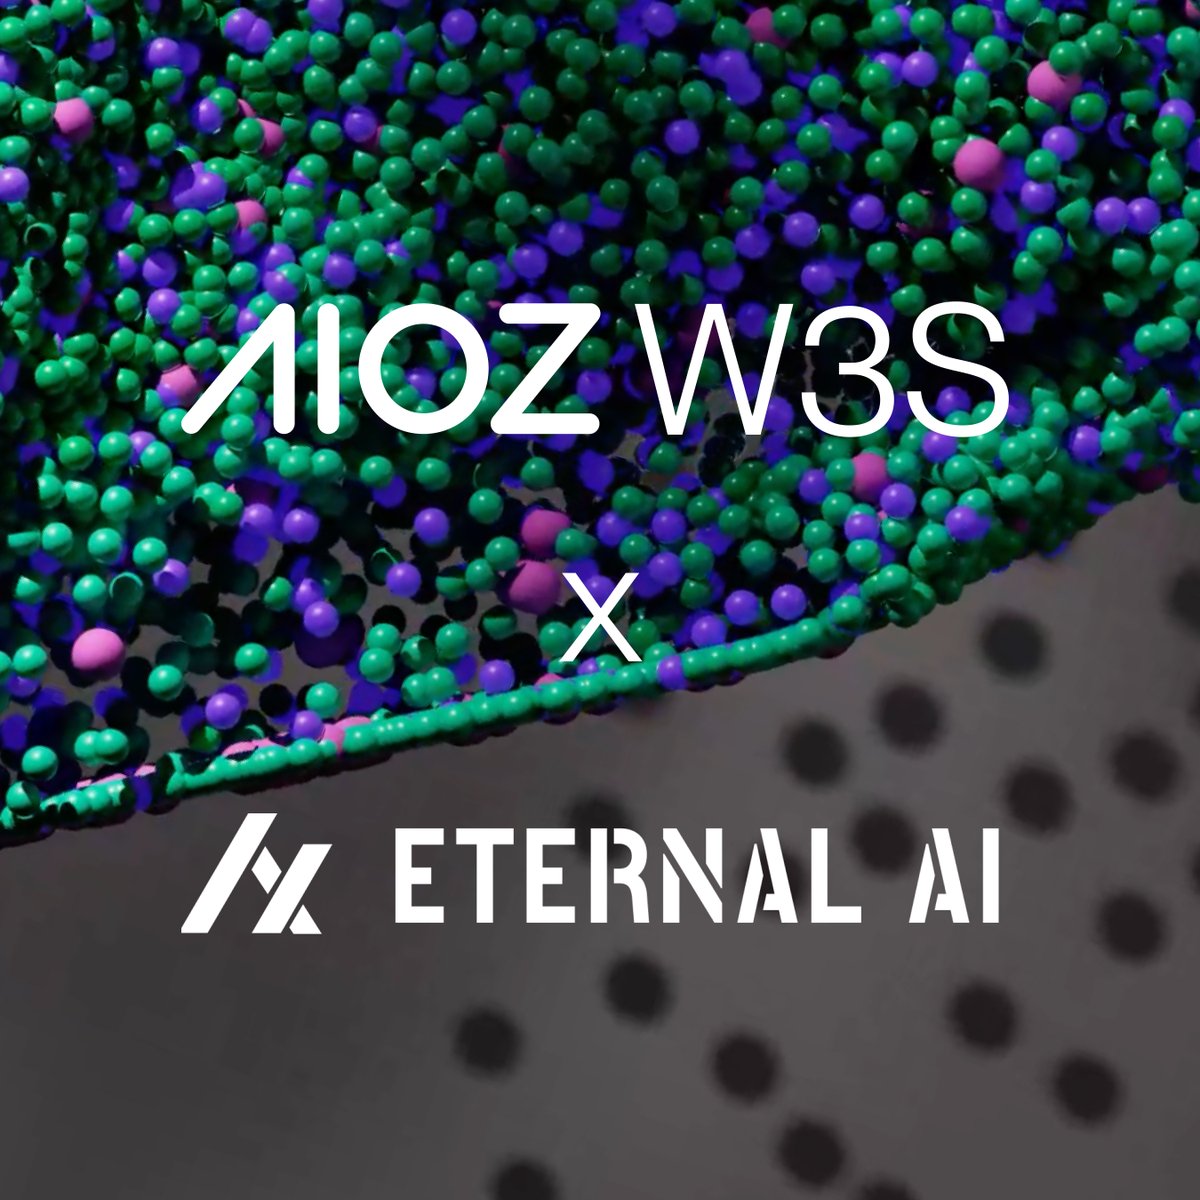 📢 Eternal AI is now integrated with AIOZ #W3S for the decentralized storage of their #AI models, powered by 120K+ AIOZ #DePIN nodes!

@CryptoEternalAI is the first #Bitcoin L2 designed for decentralized AI, enabling anyone to create and power decentralized AI. 🚀

The…